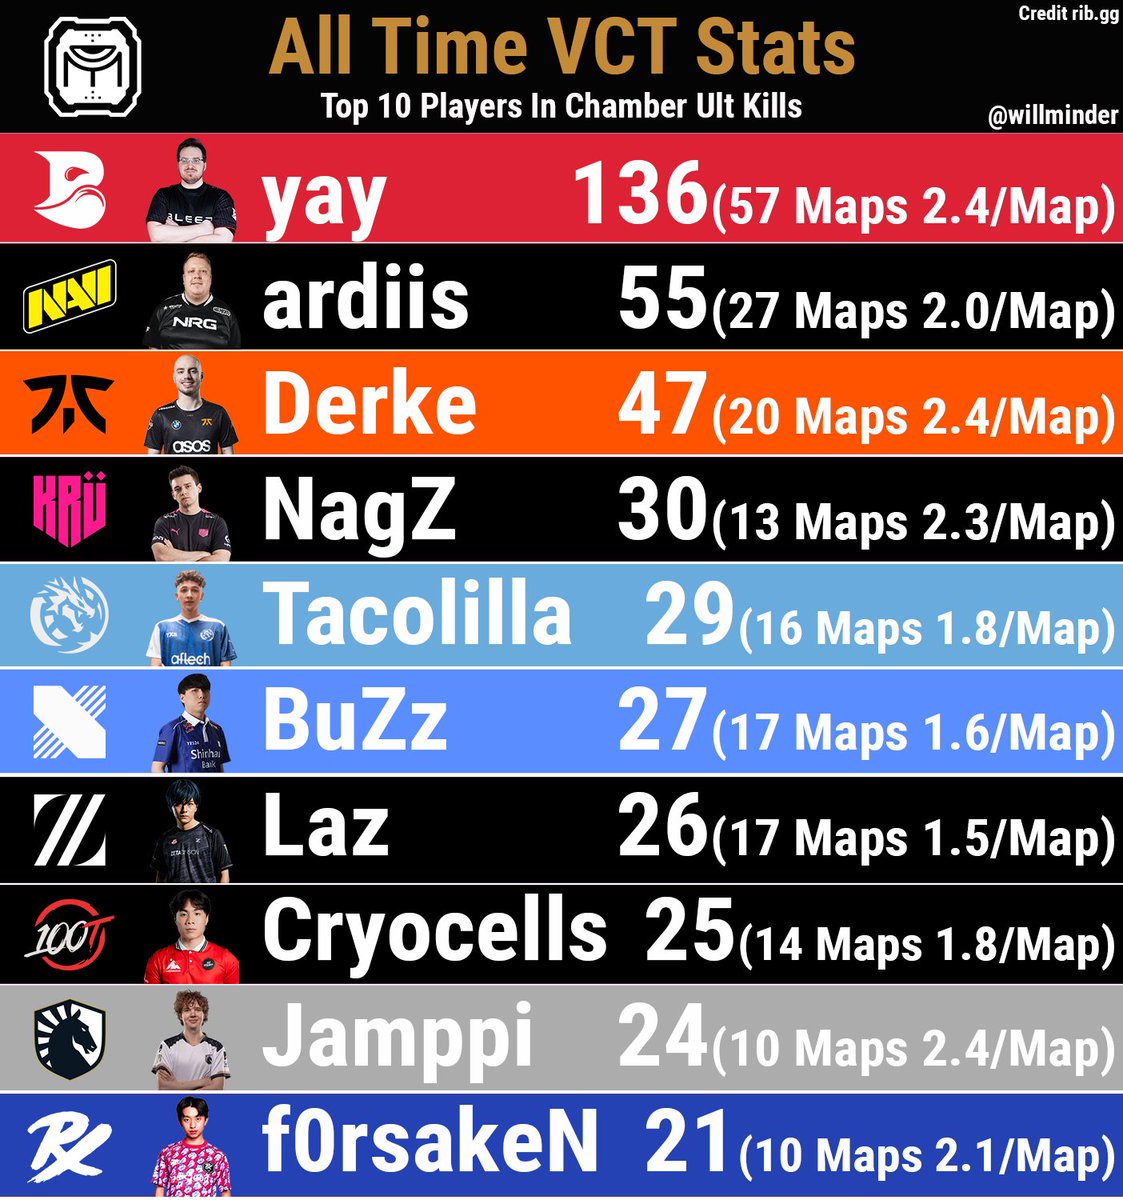 Players with the most Tour De Force kills in international VCT events and their kills per Chamber map